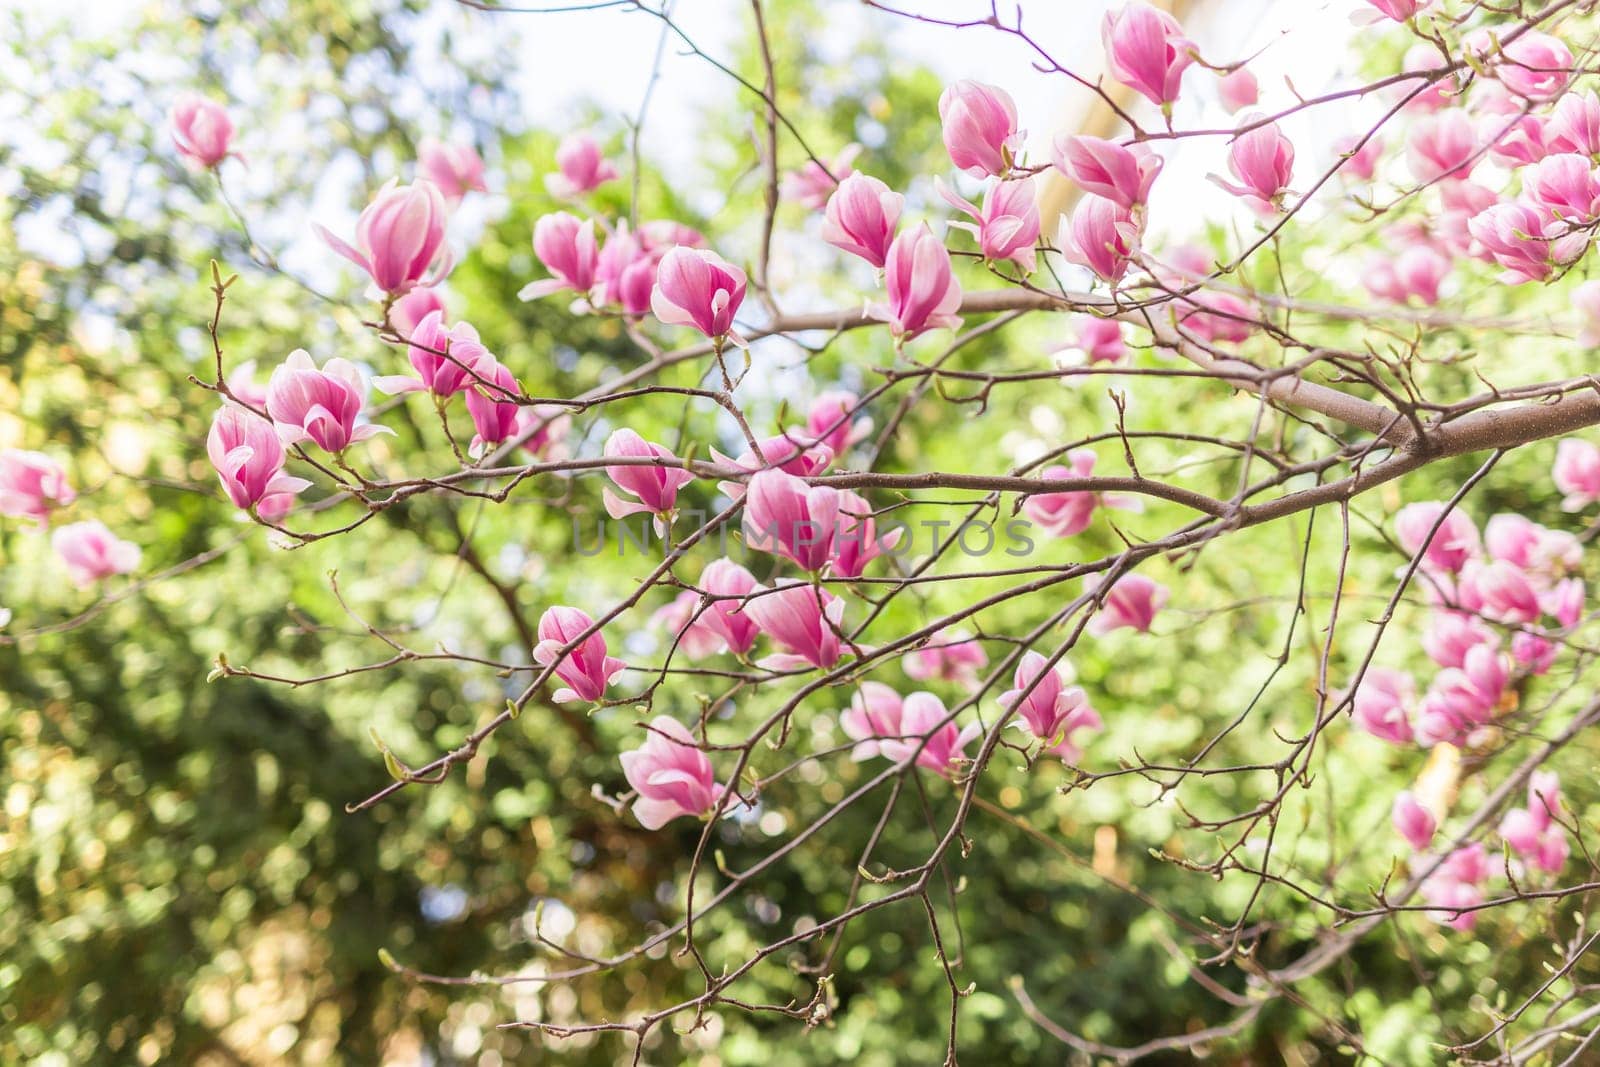 Beautiful blooming magnolia tree flower in the garden. Spring bloom time by Satura86